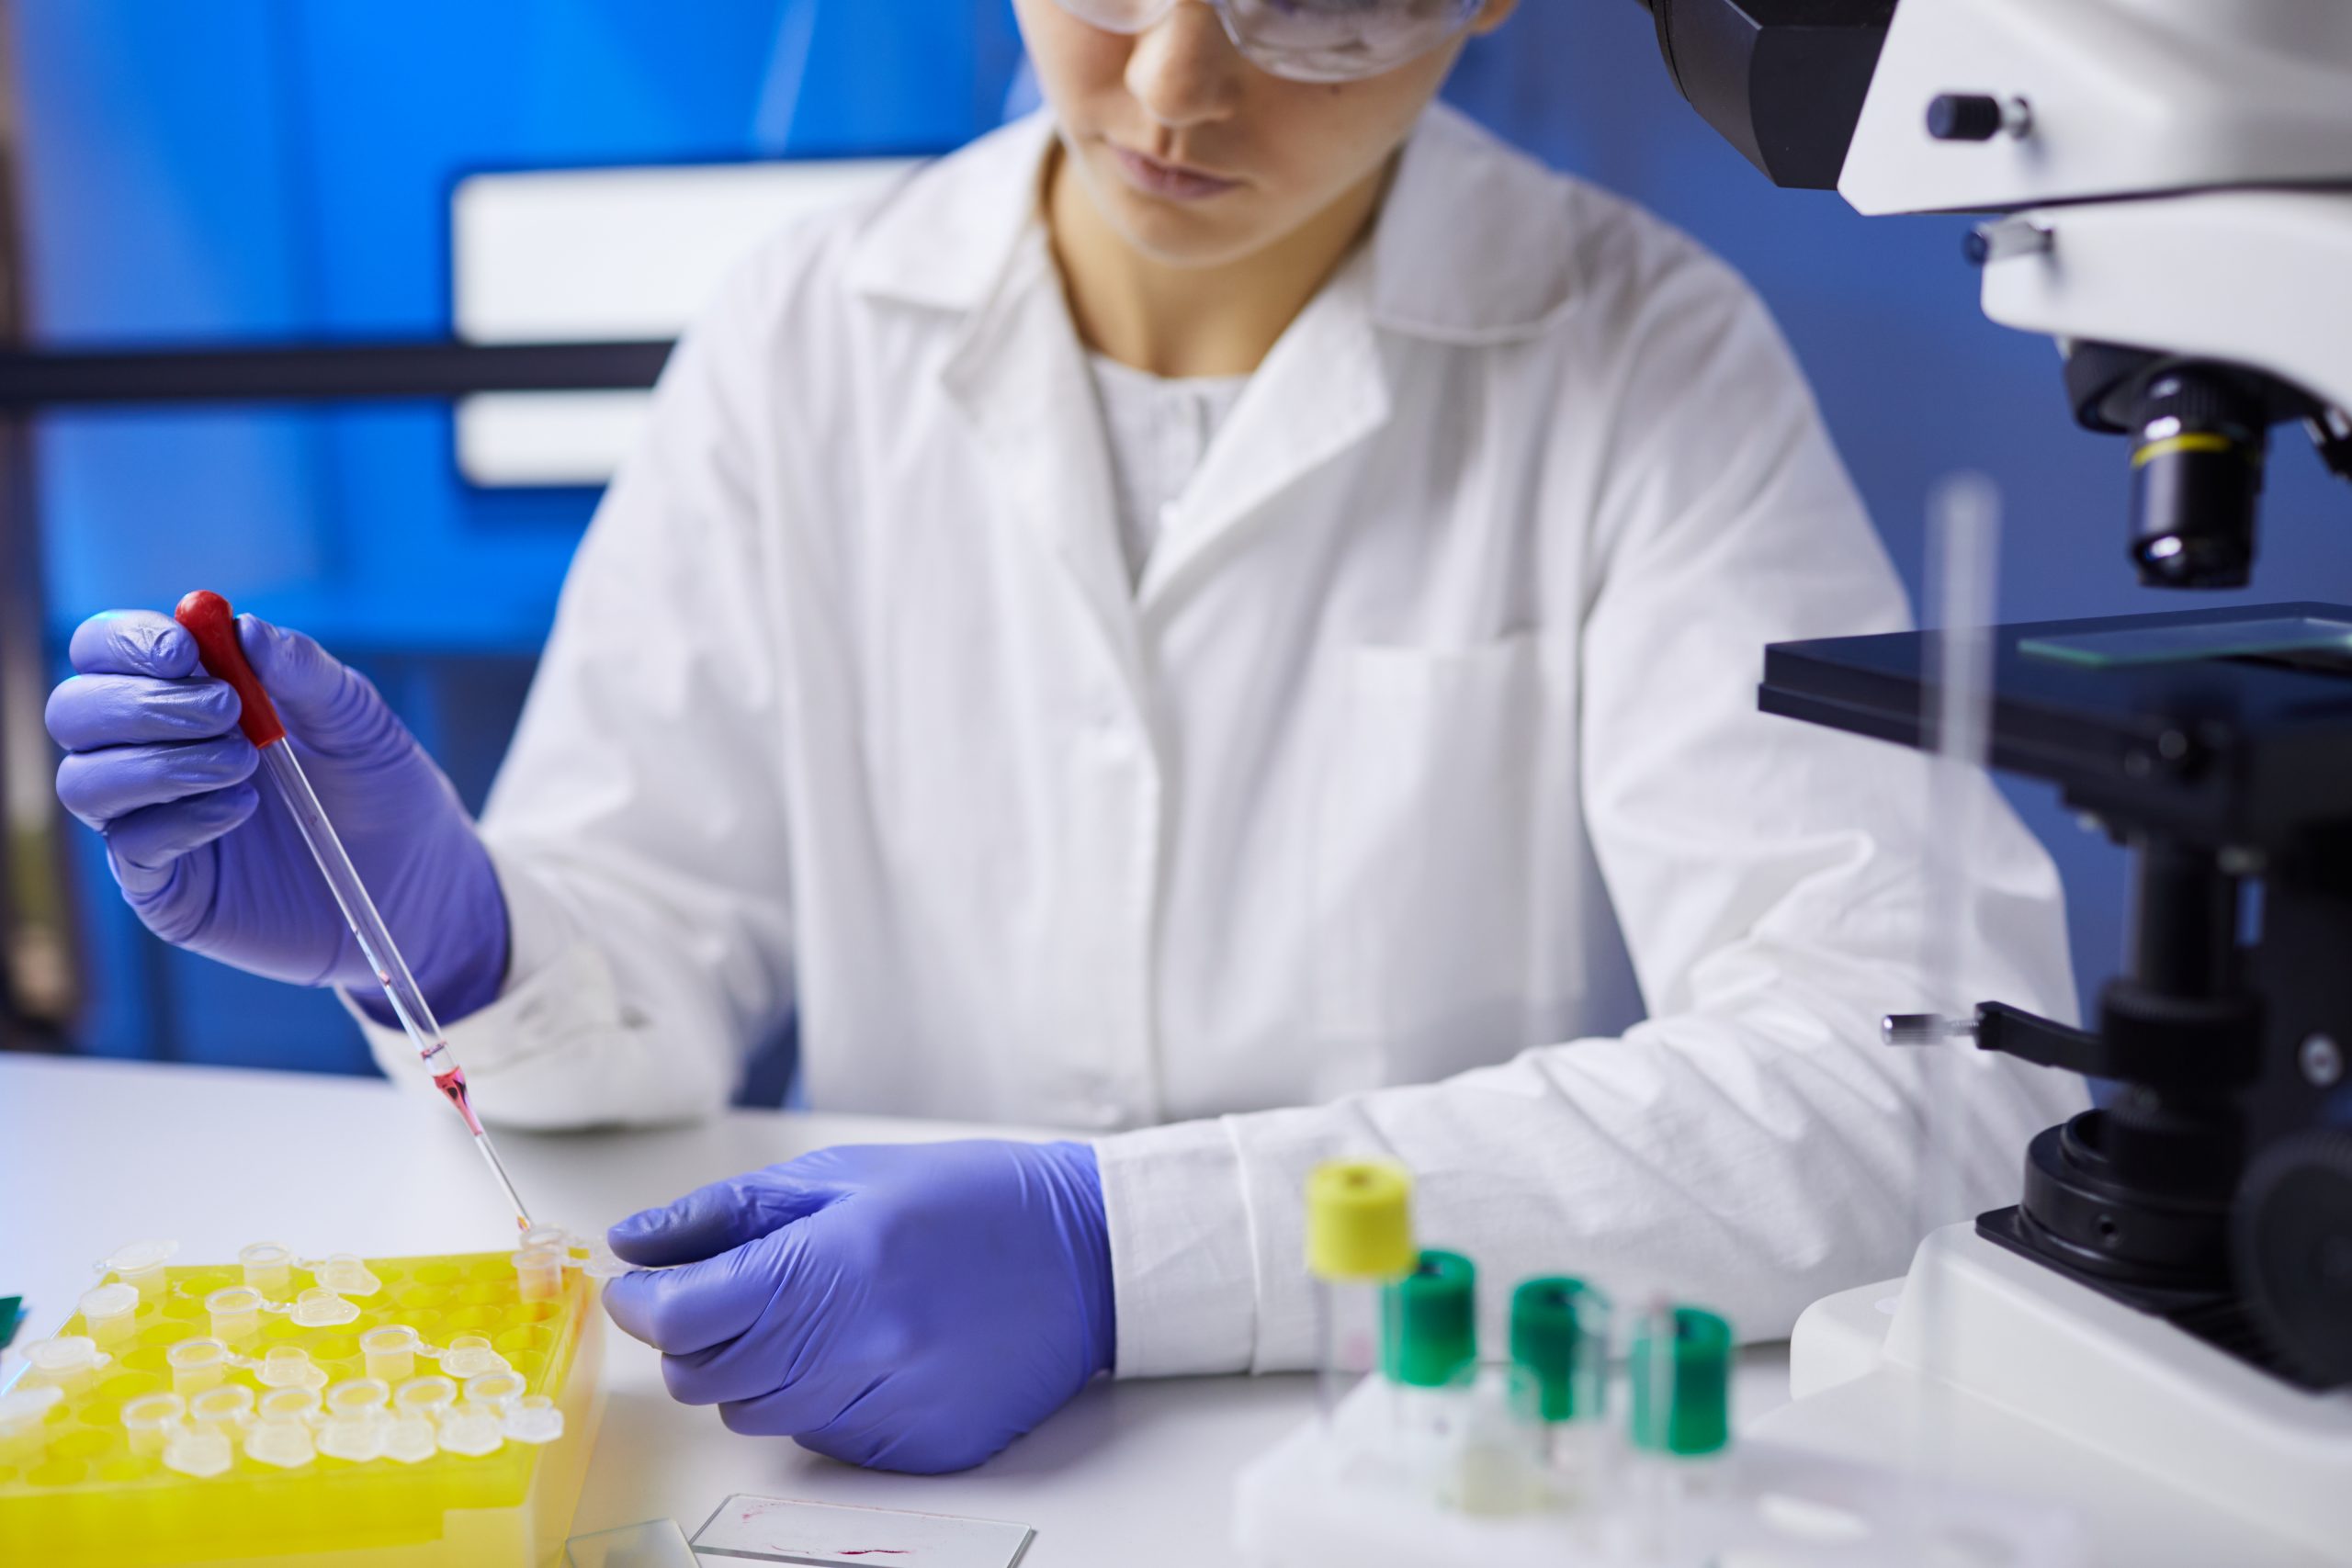 Close up of unrecognizable young woman preparing blood samples while working on research in medical laboratory, copy space